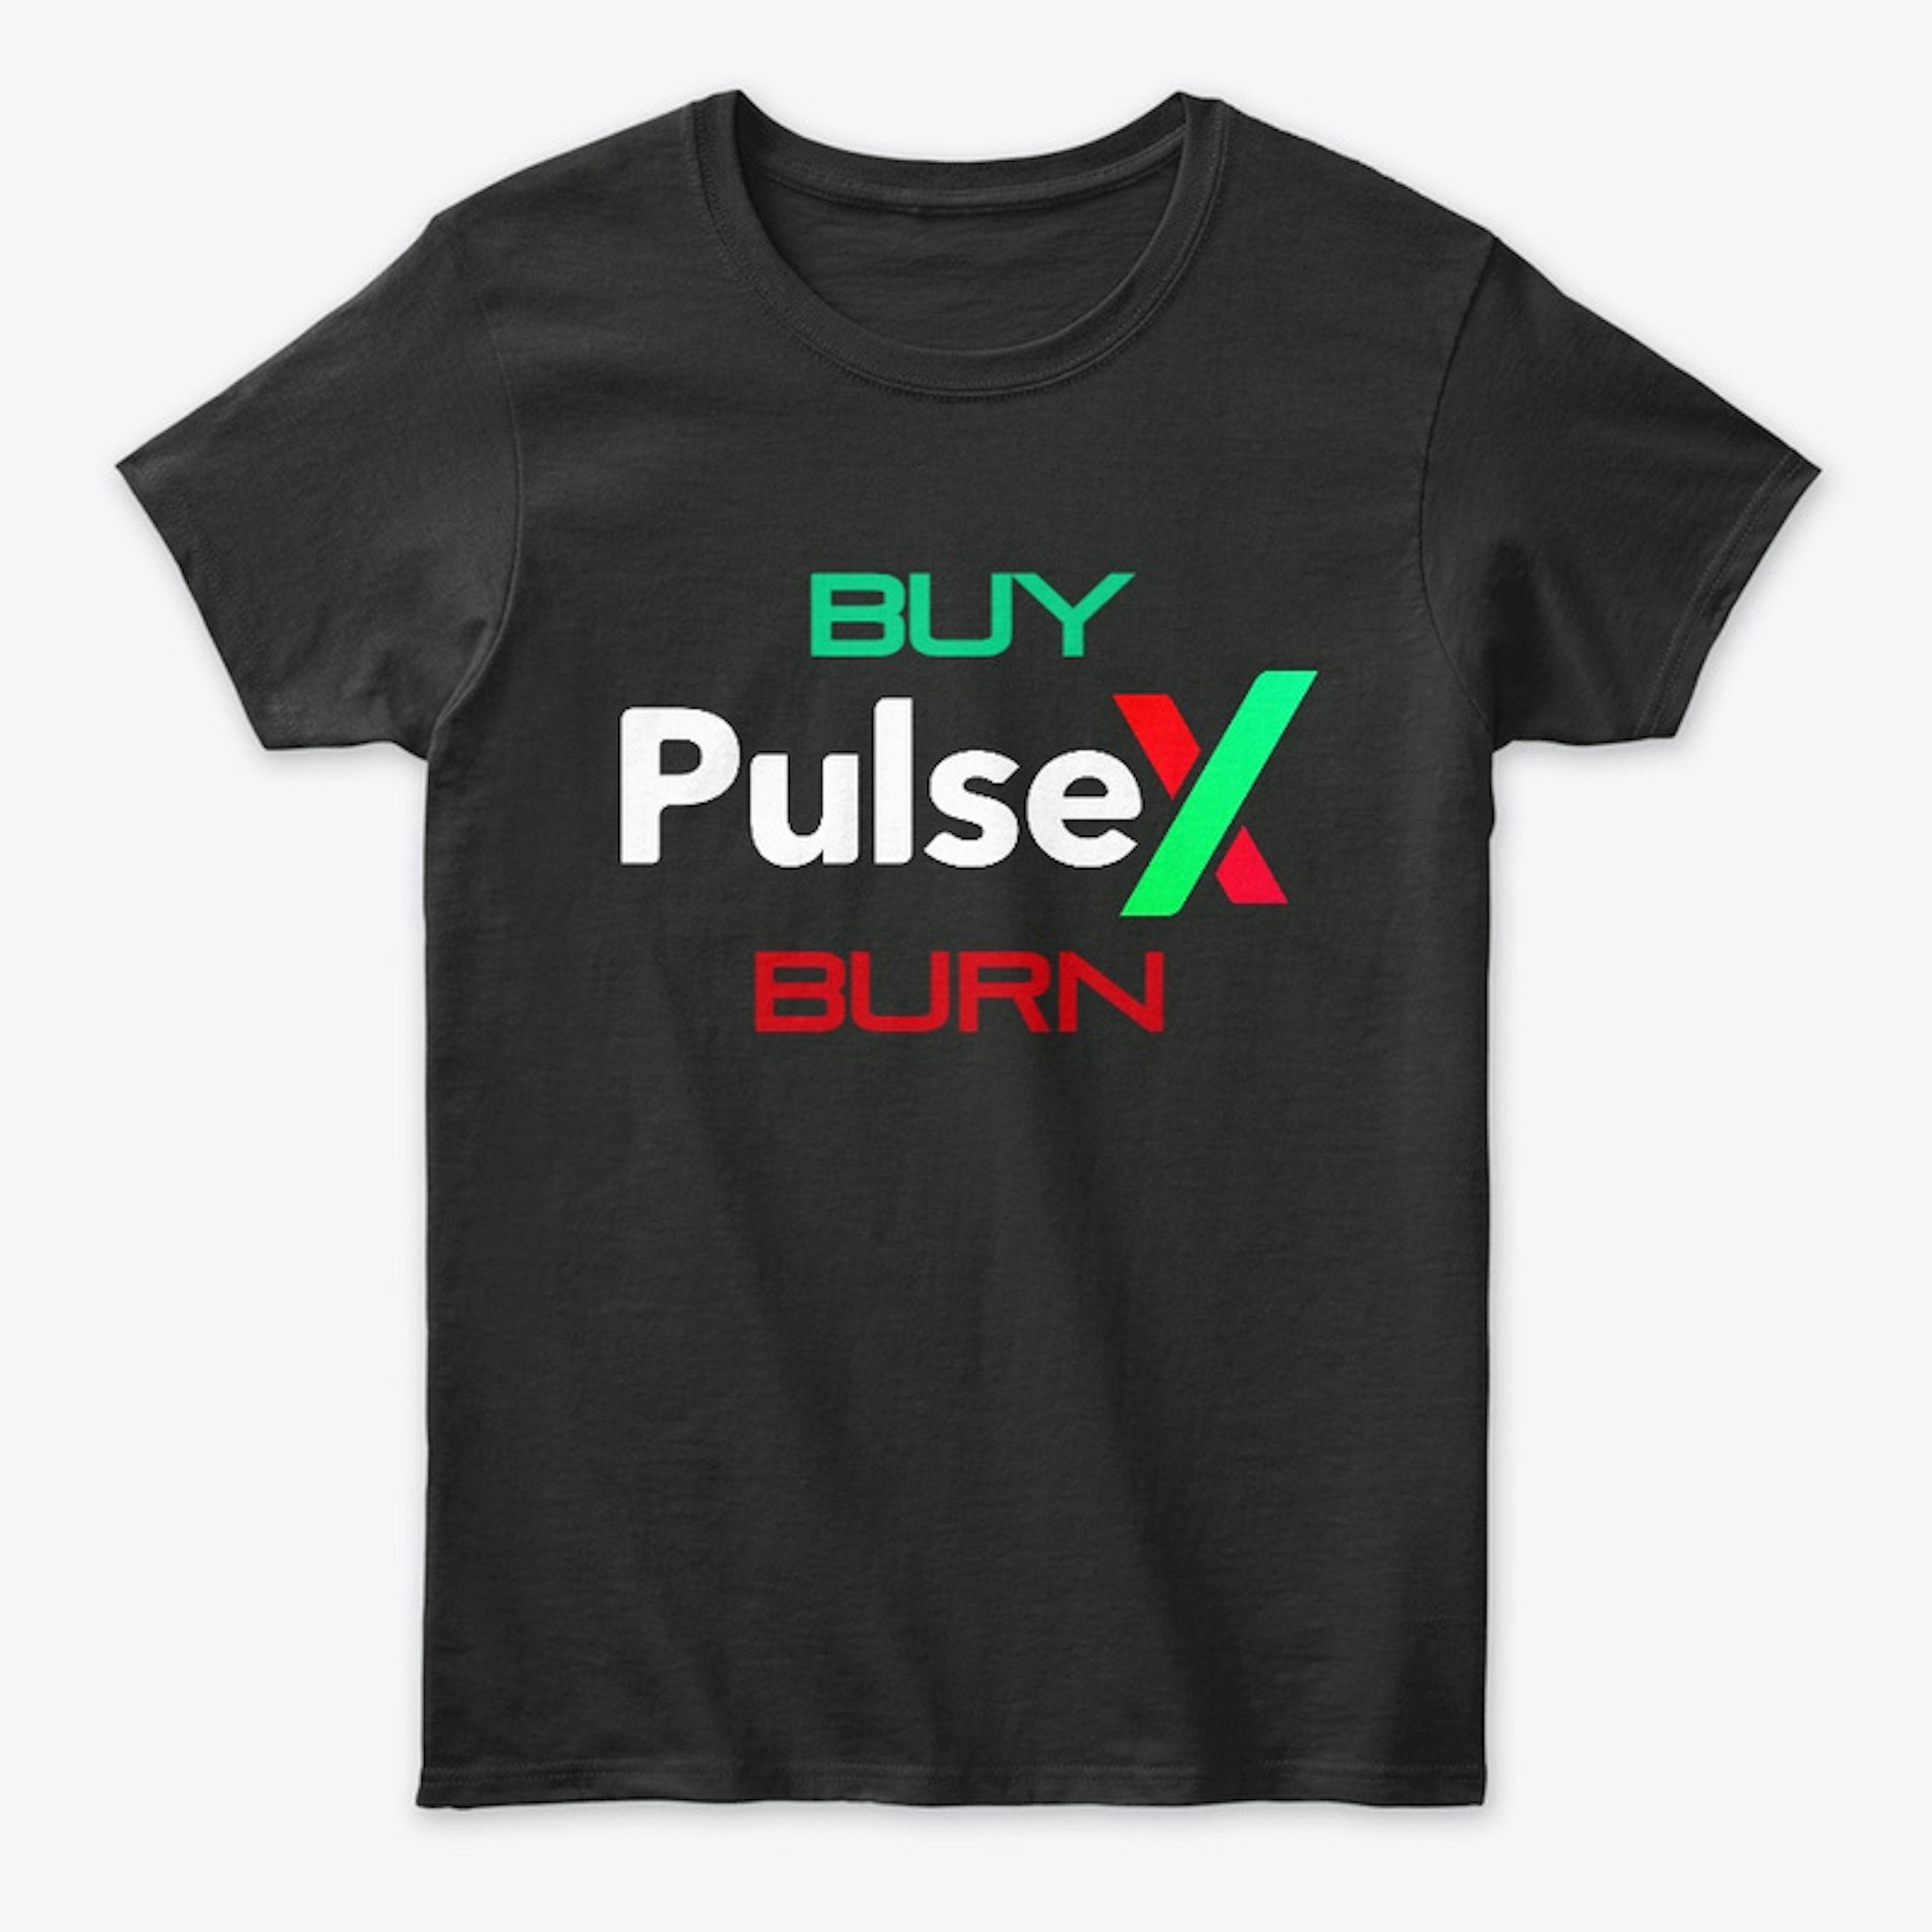 PulseX "Buy and Burn" Collection